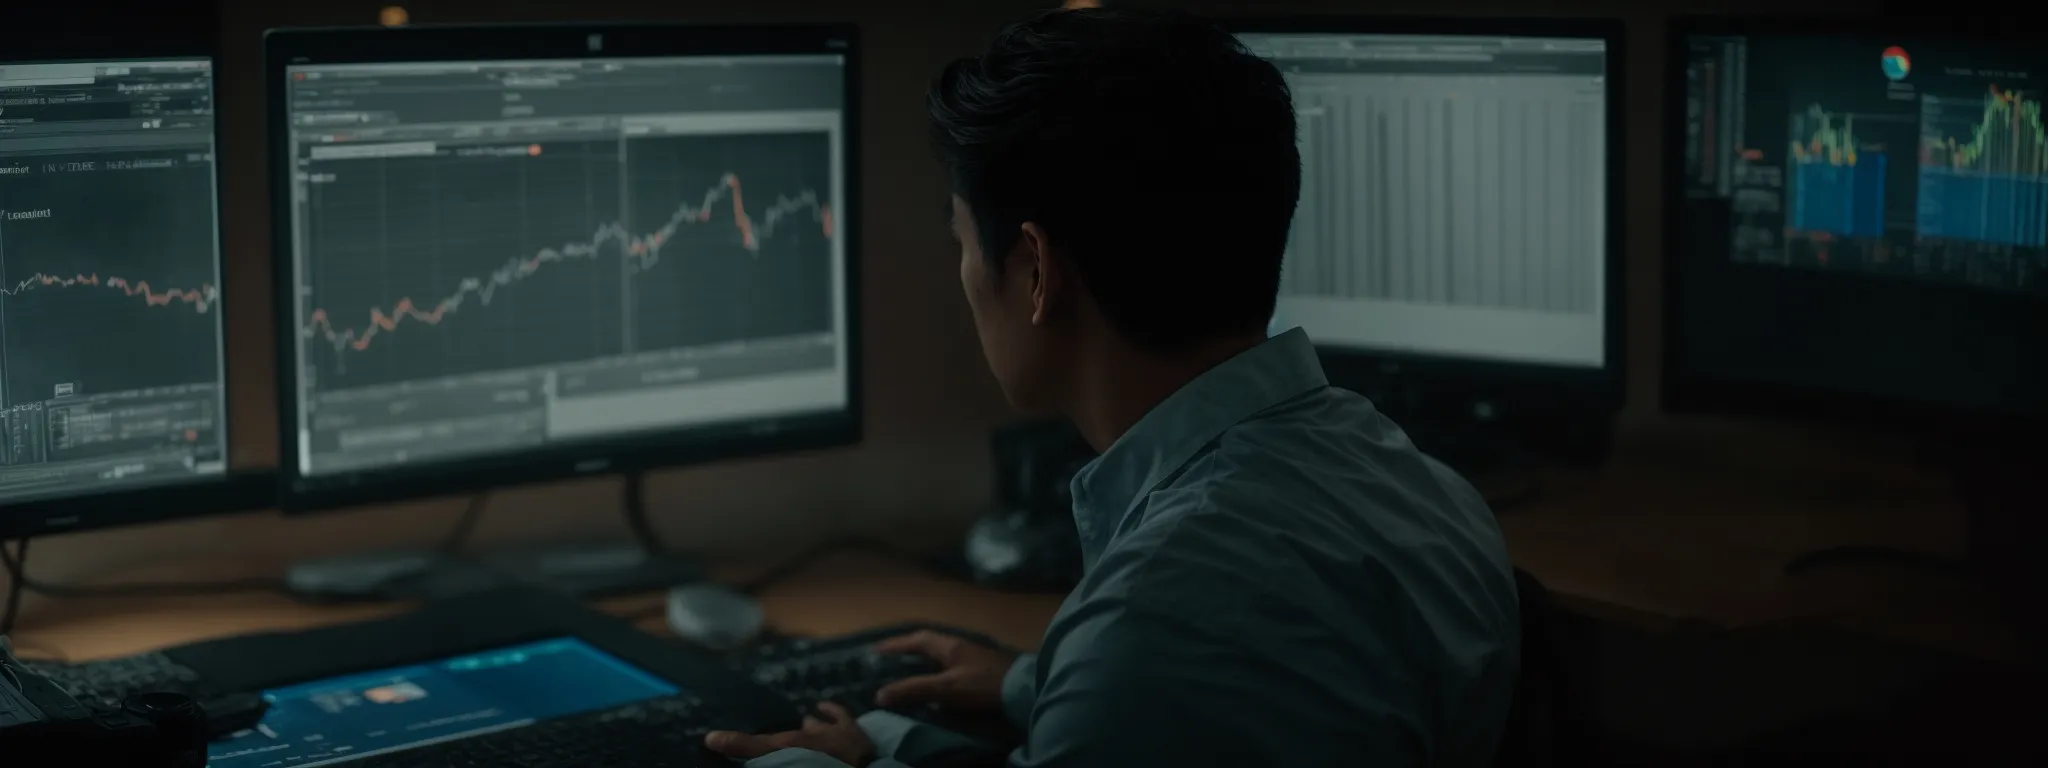 a person intently observing a computer screen filled with performance graphs and timing metrics.